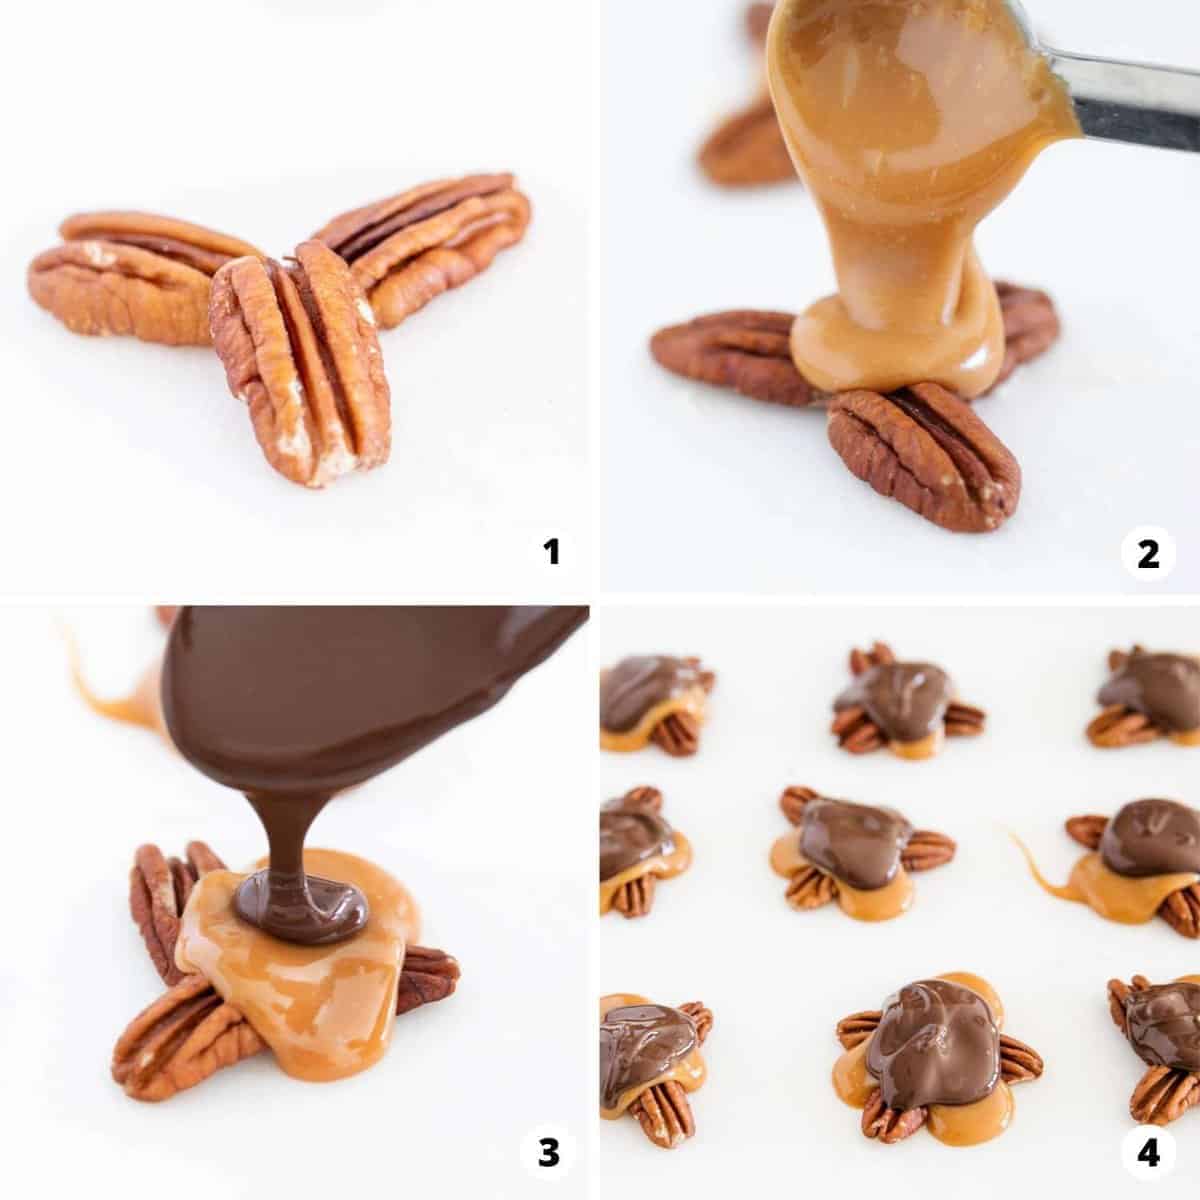 Showing how to make chocolate turtles in a collage. 